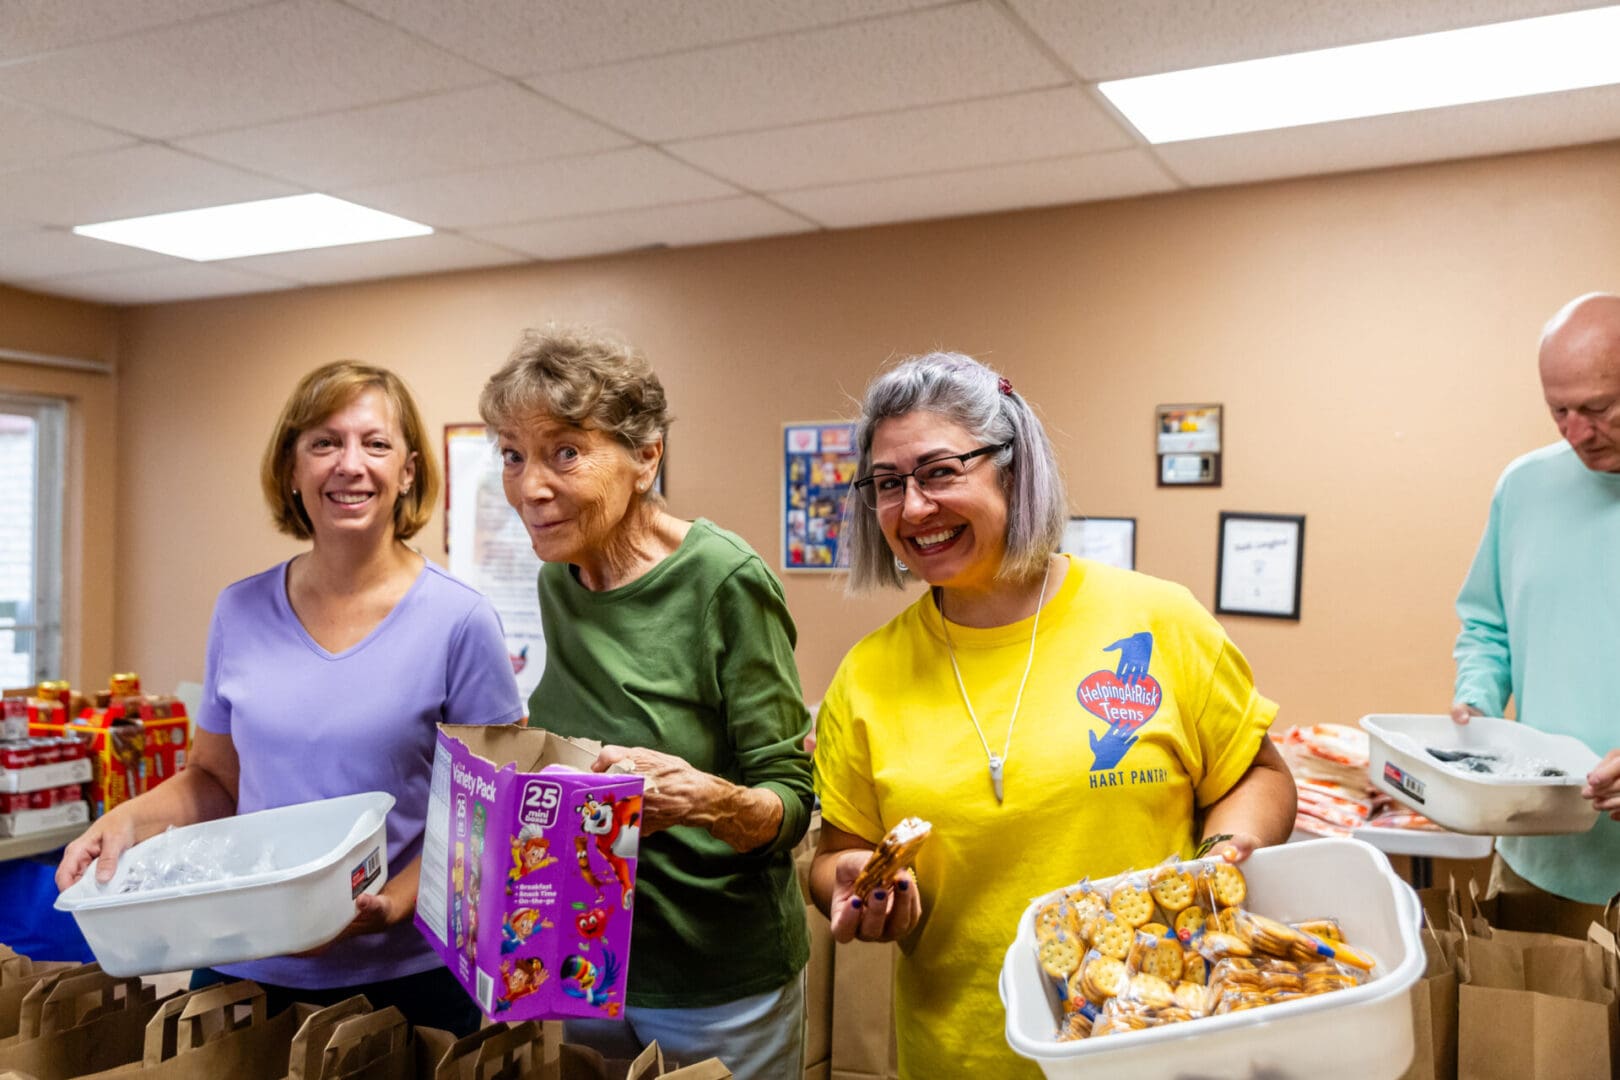 Three women are holding boxes of food and smiling.